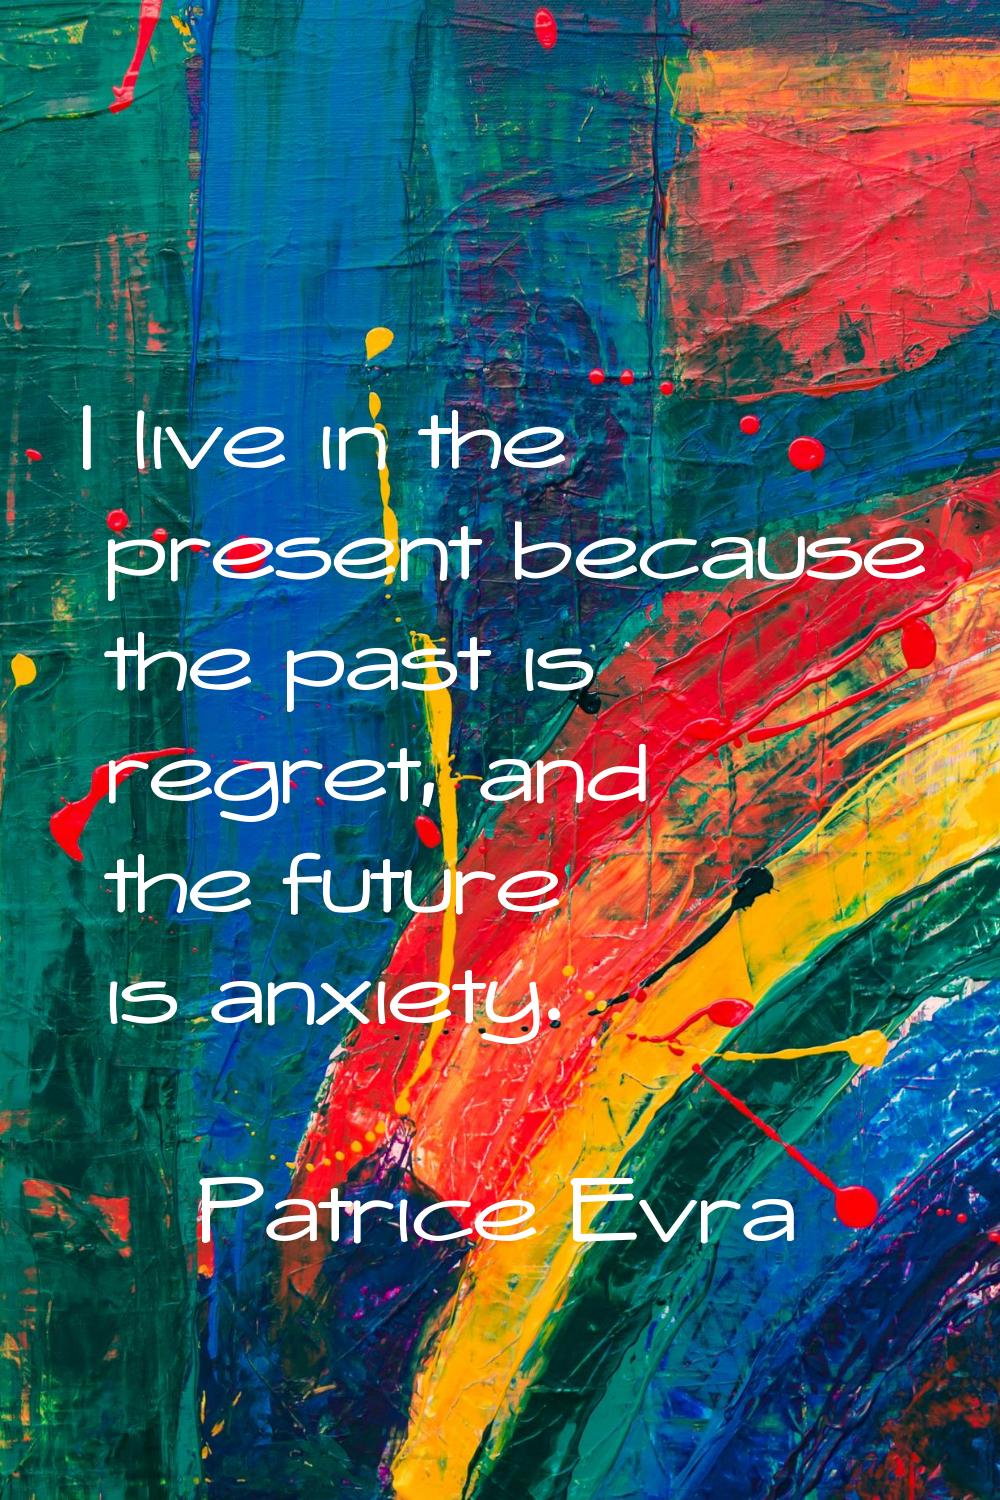 I live in the present because the past is regret, and the future is anxiety.